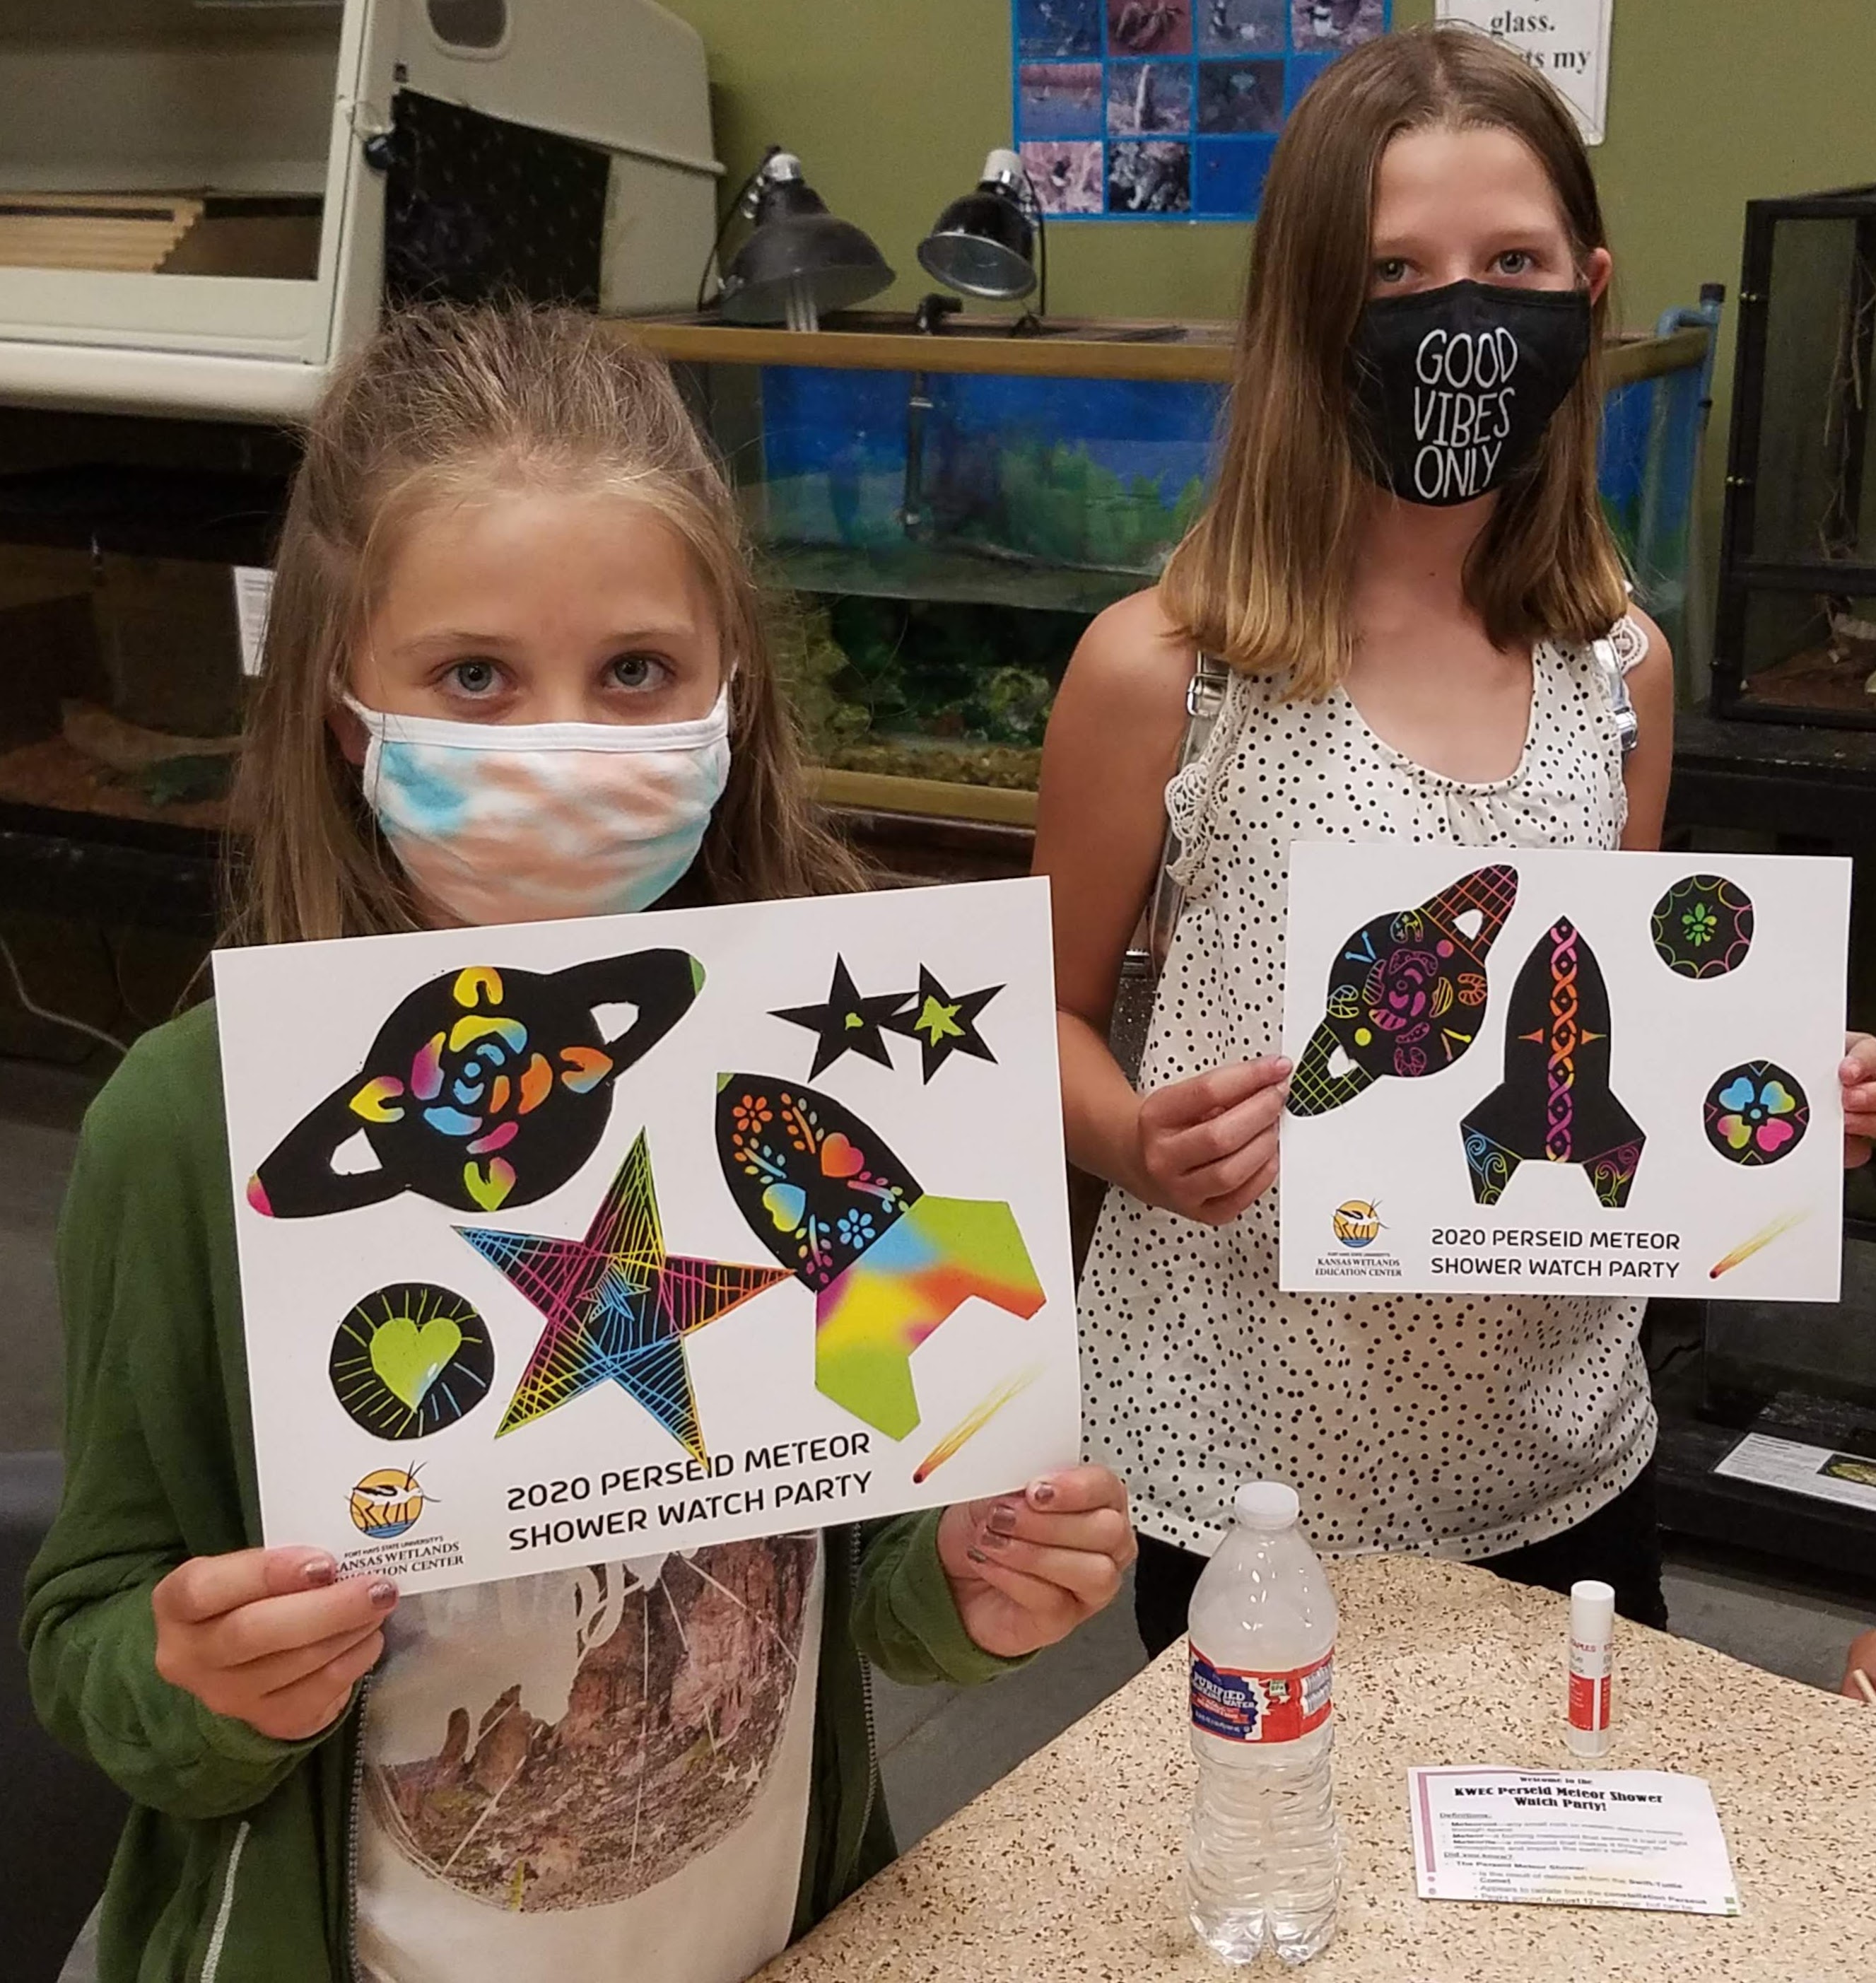 Participants from the 2020 Perseid Meteor Shower Watch Party show off their "out of this world" craft.